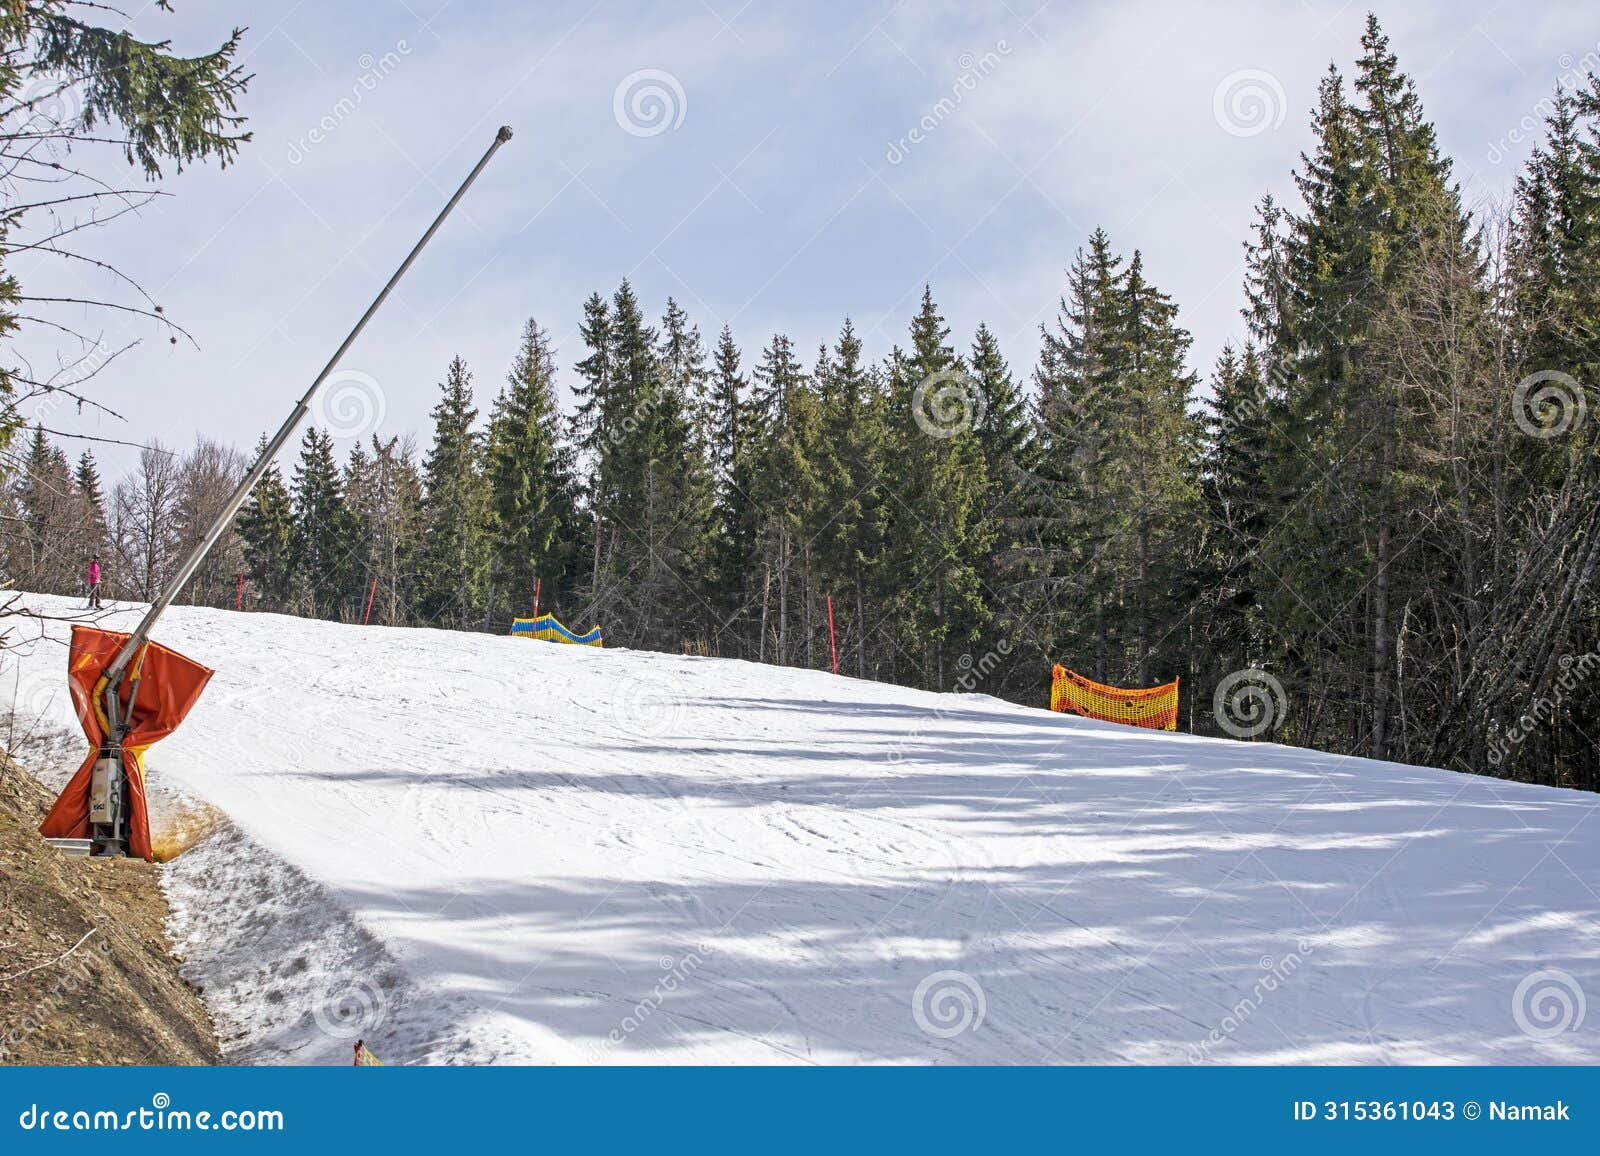 skiers on a snow slope for beginners on a sunny day.